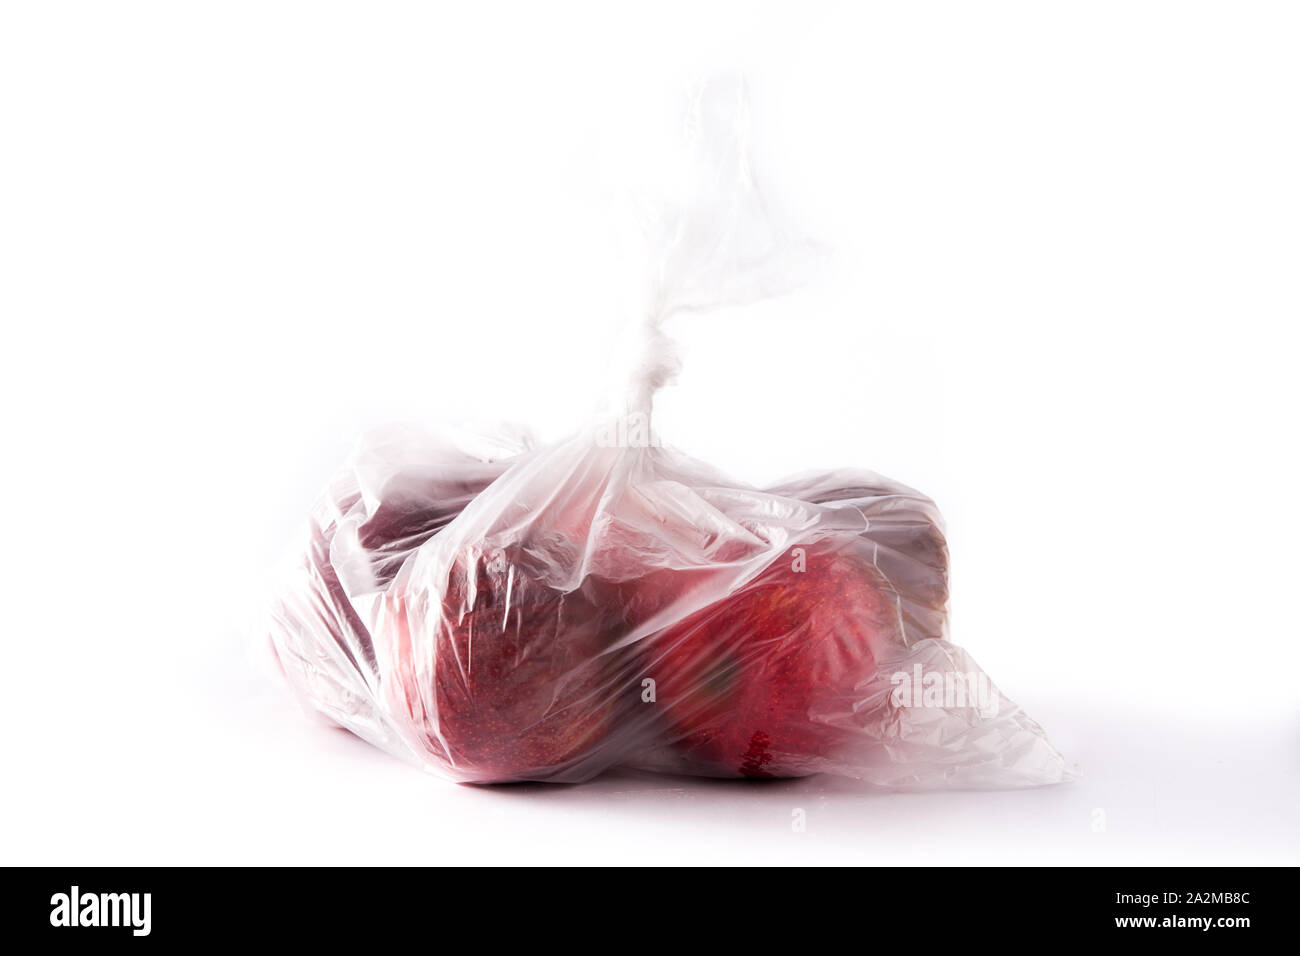 Red apples packaged in plastic bag isolated on white background Stock Photo